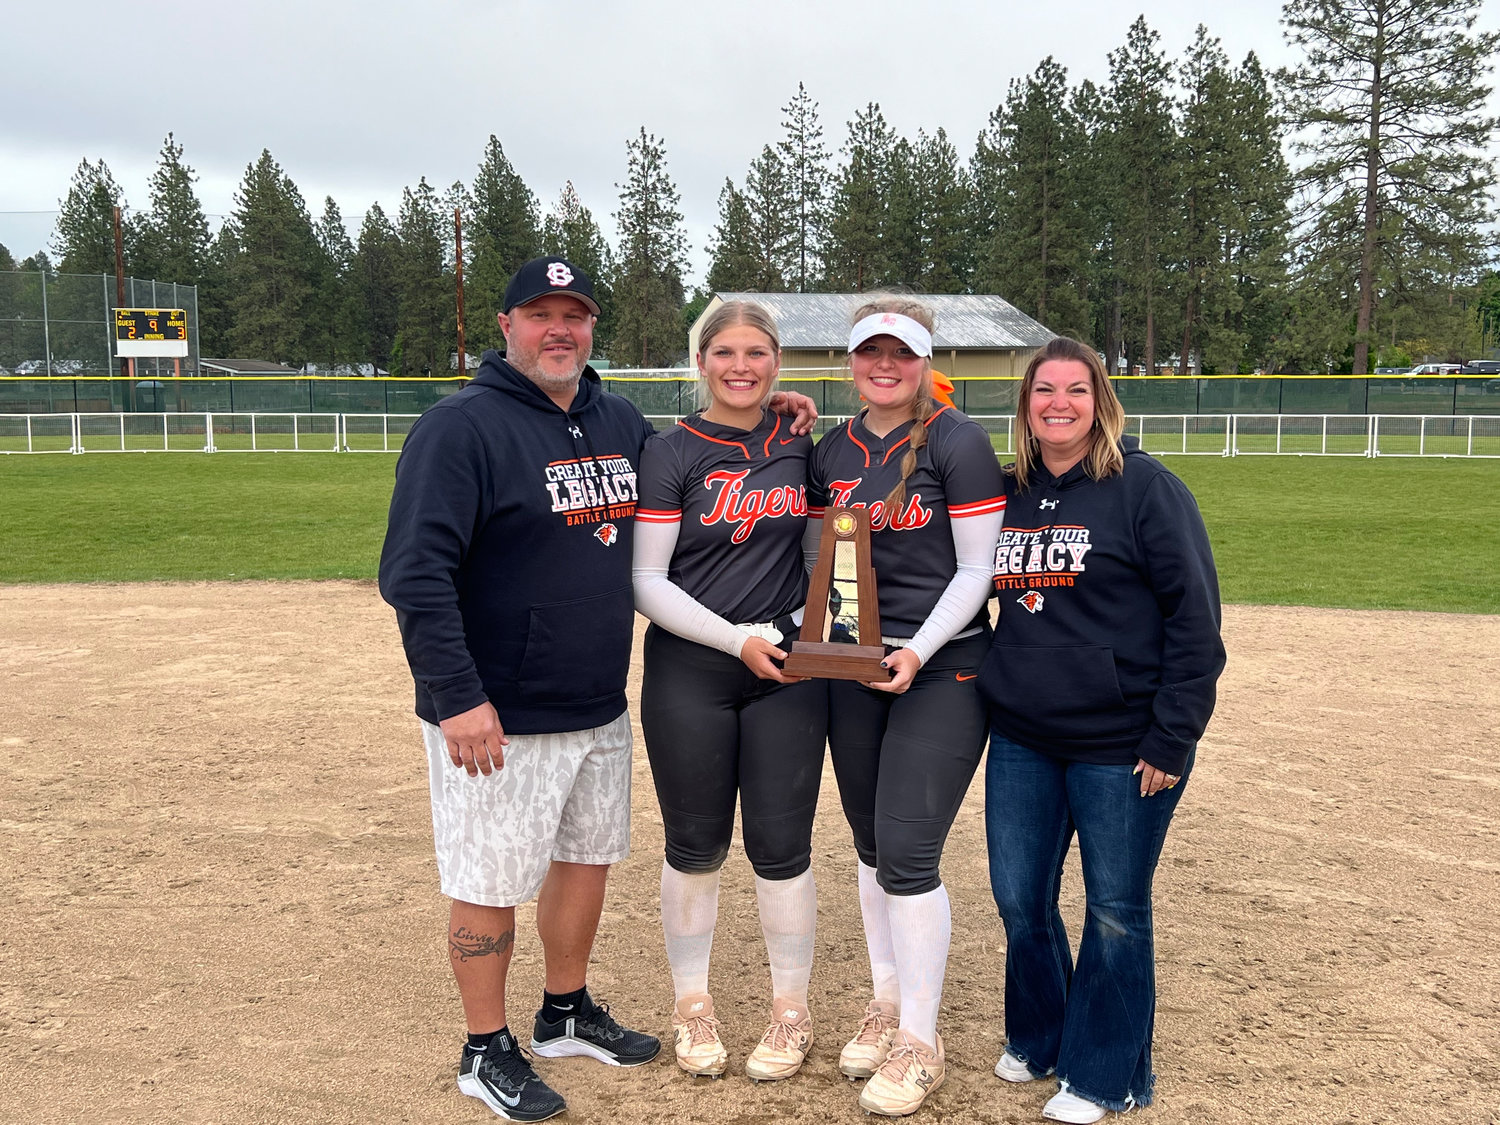 Dan, Cady, Liv, and Tiffany Gruenberg are pictured after winning third place at the state softball tournament in May.